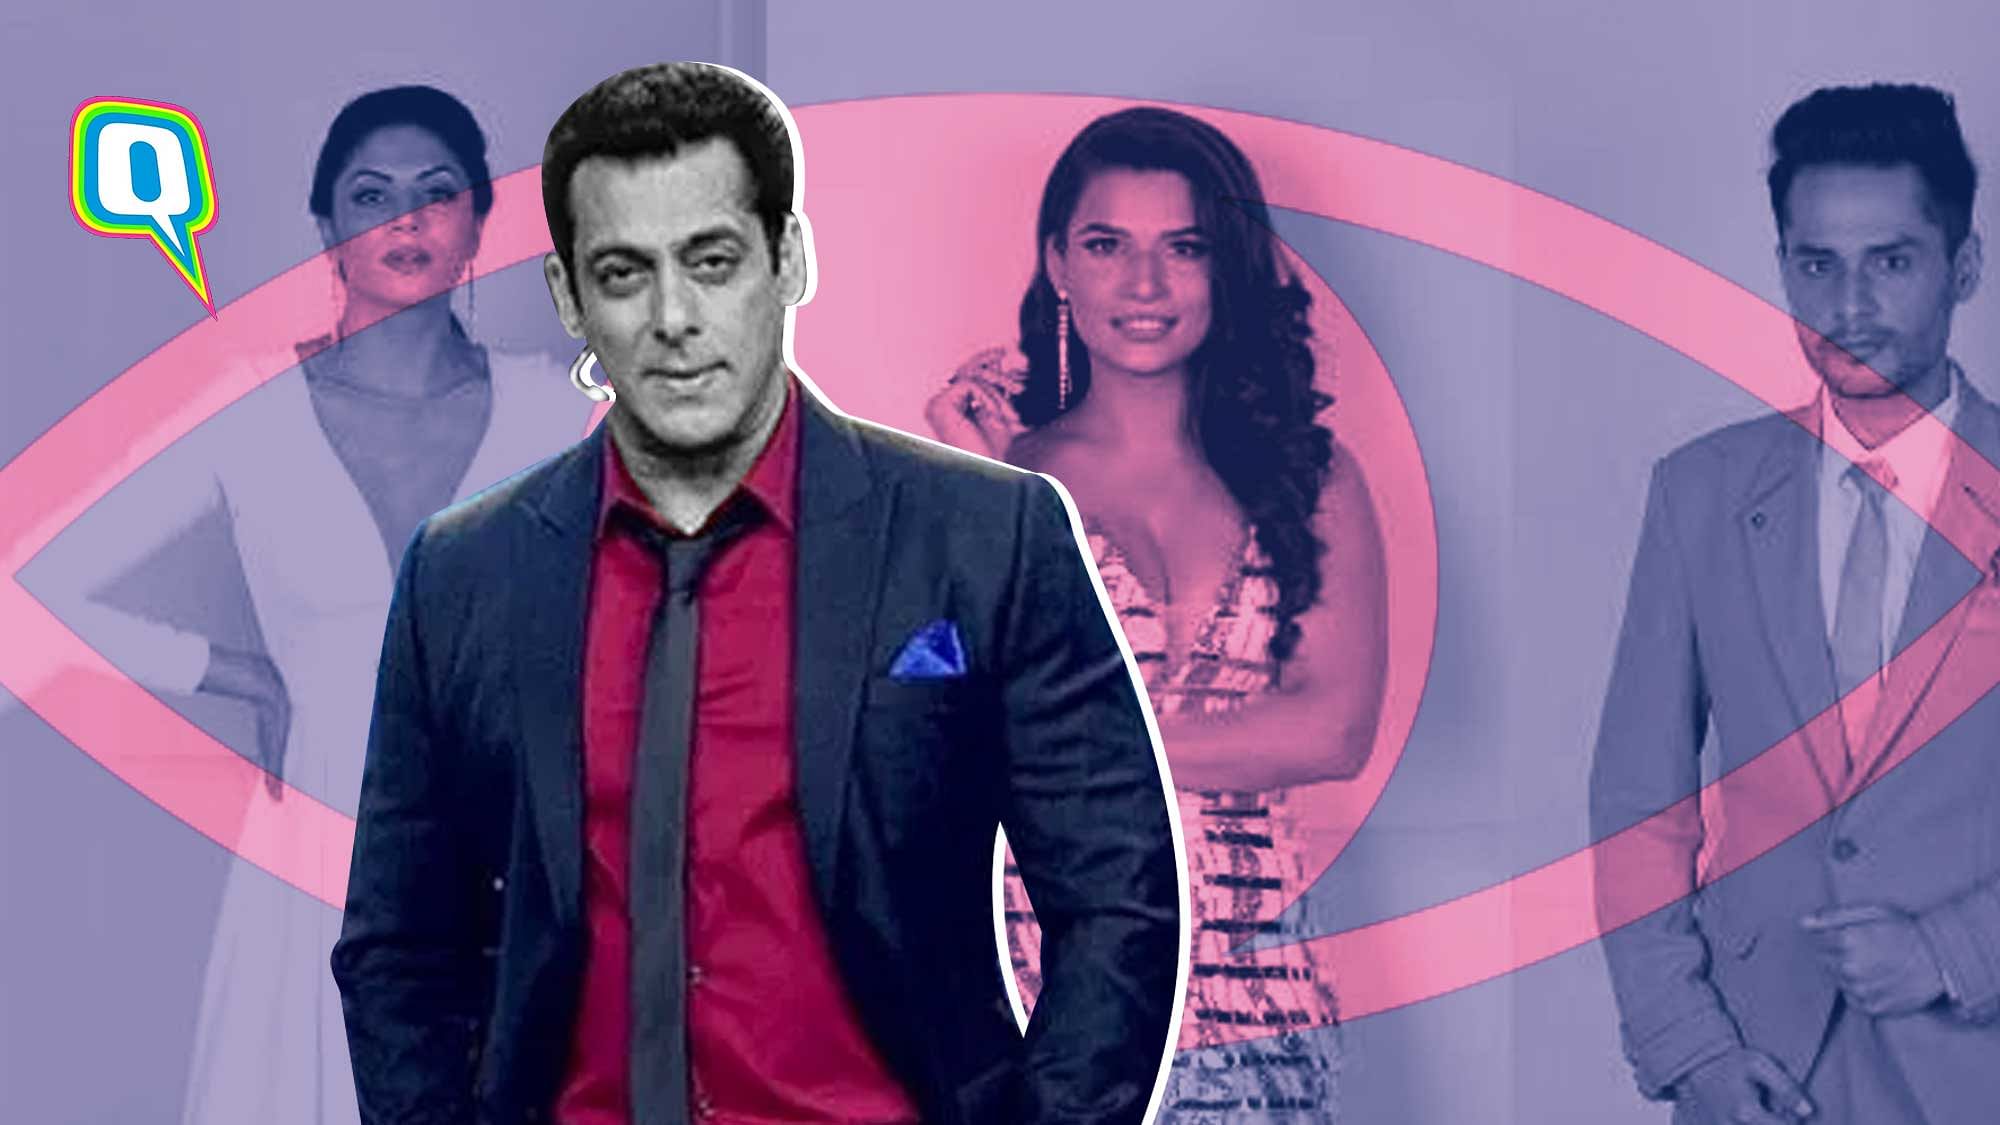 I Watched ‘Bigg Boss’ for the Very First Time and Here’s What I Thought